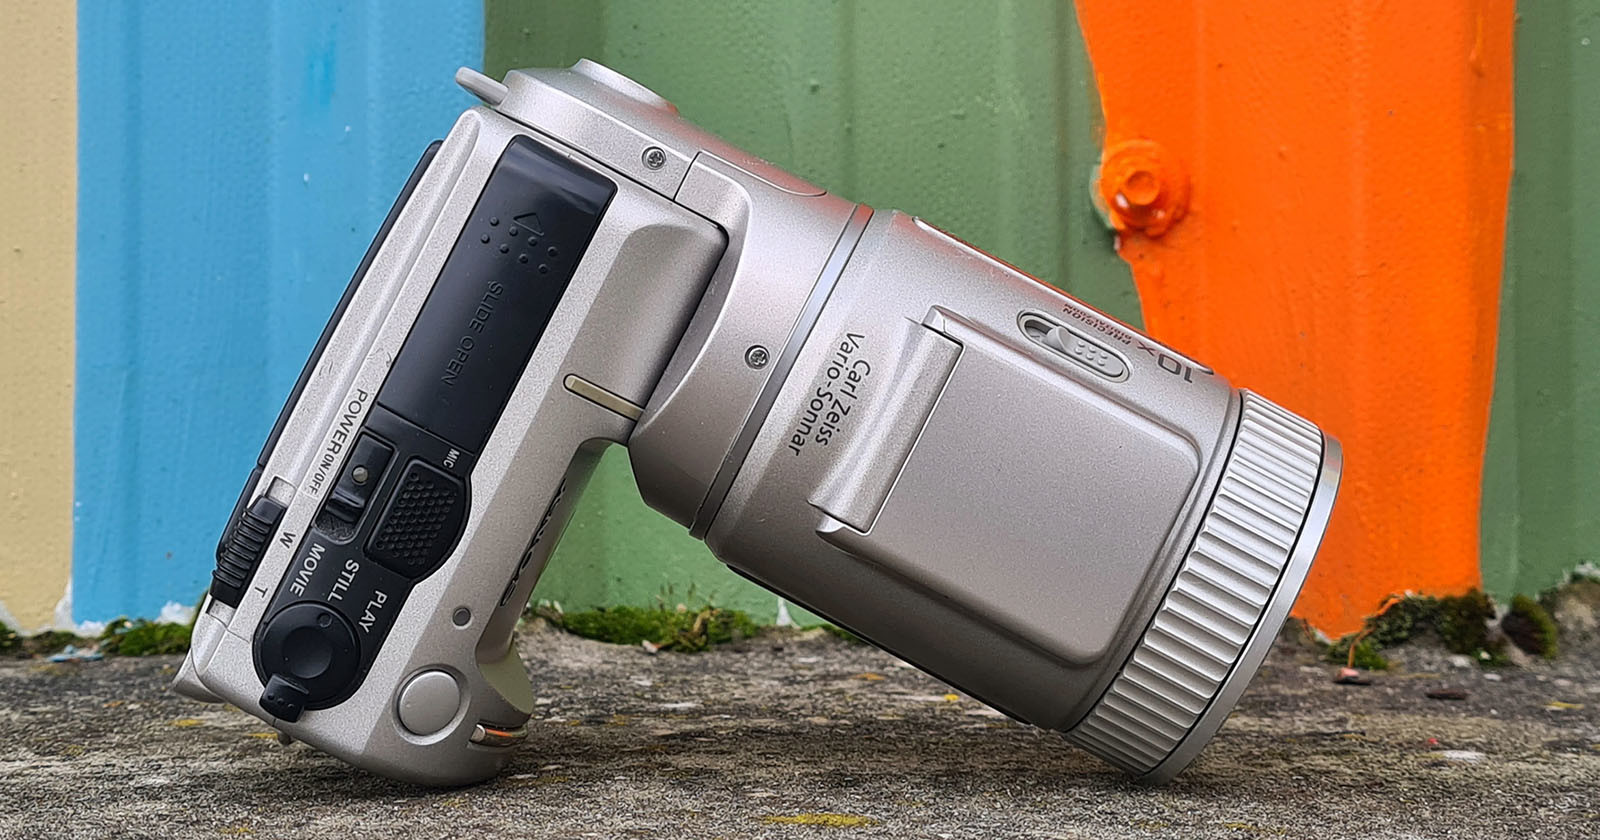 Sonys Cyber-Shot F505 Remains a Clever Camera 24 Years Later